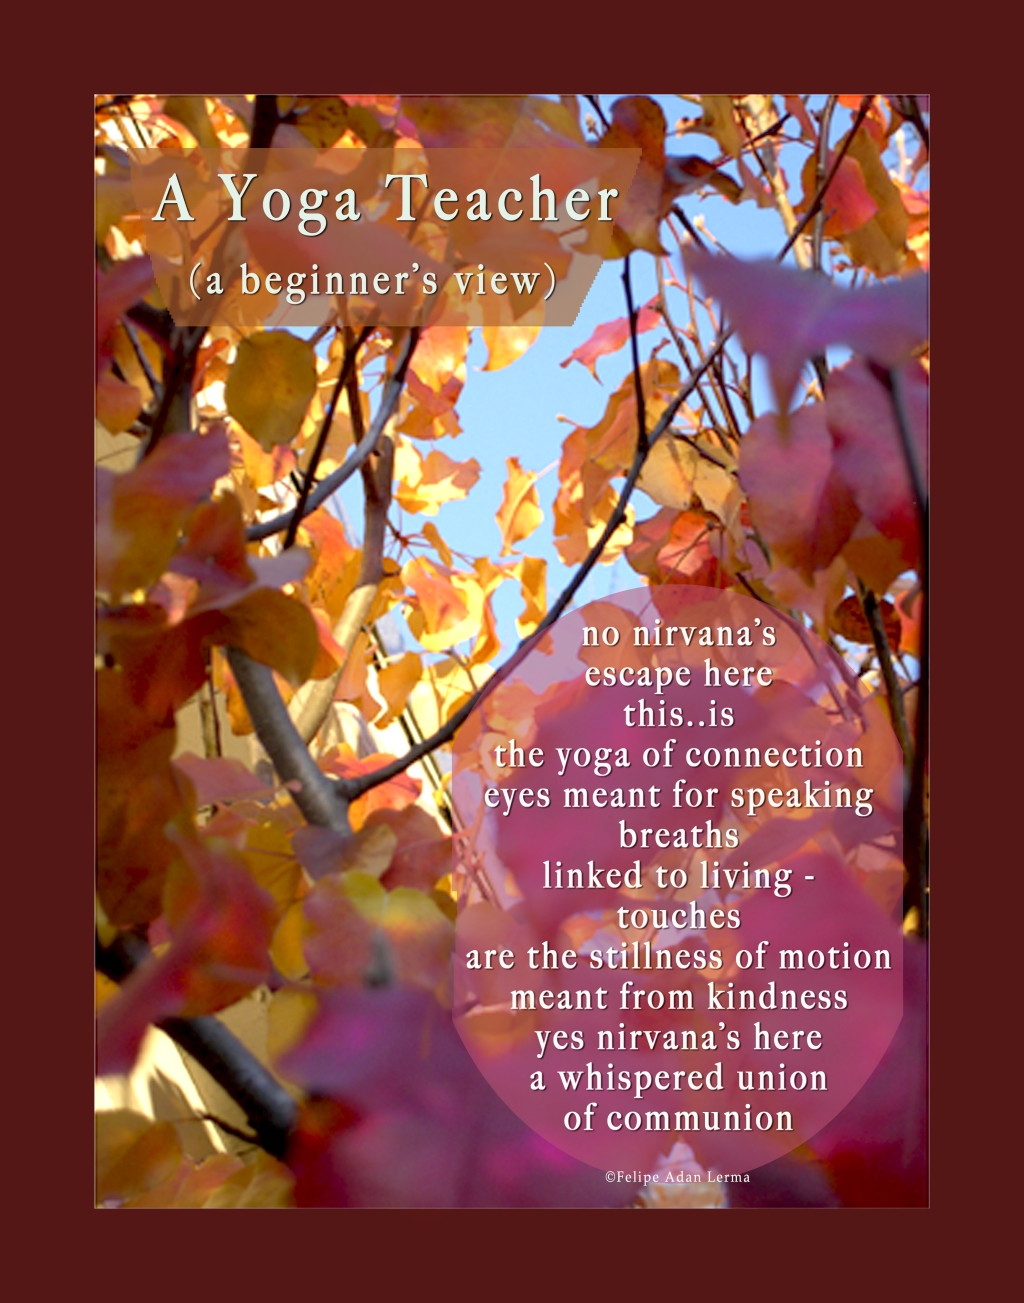 July 24, 2022 – My Most Viewed Image this Past Week @FineArtAmerica, “A Yoga Teacher” : circa 2011